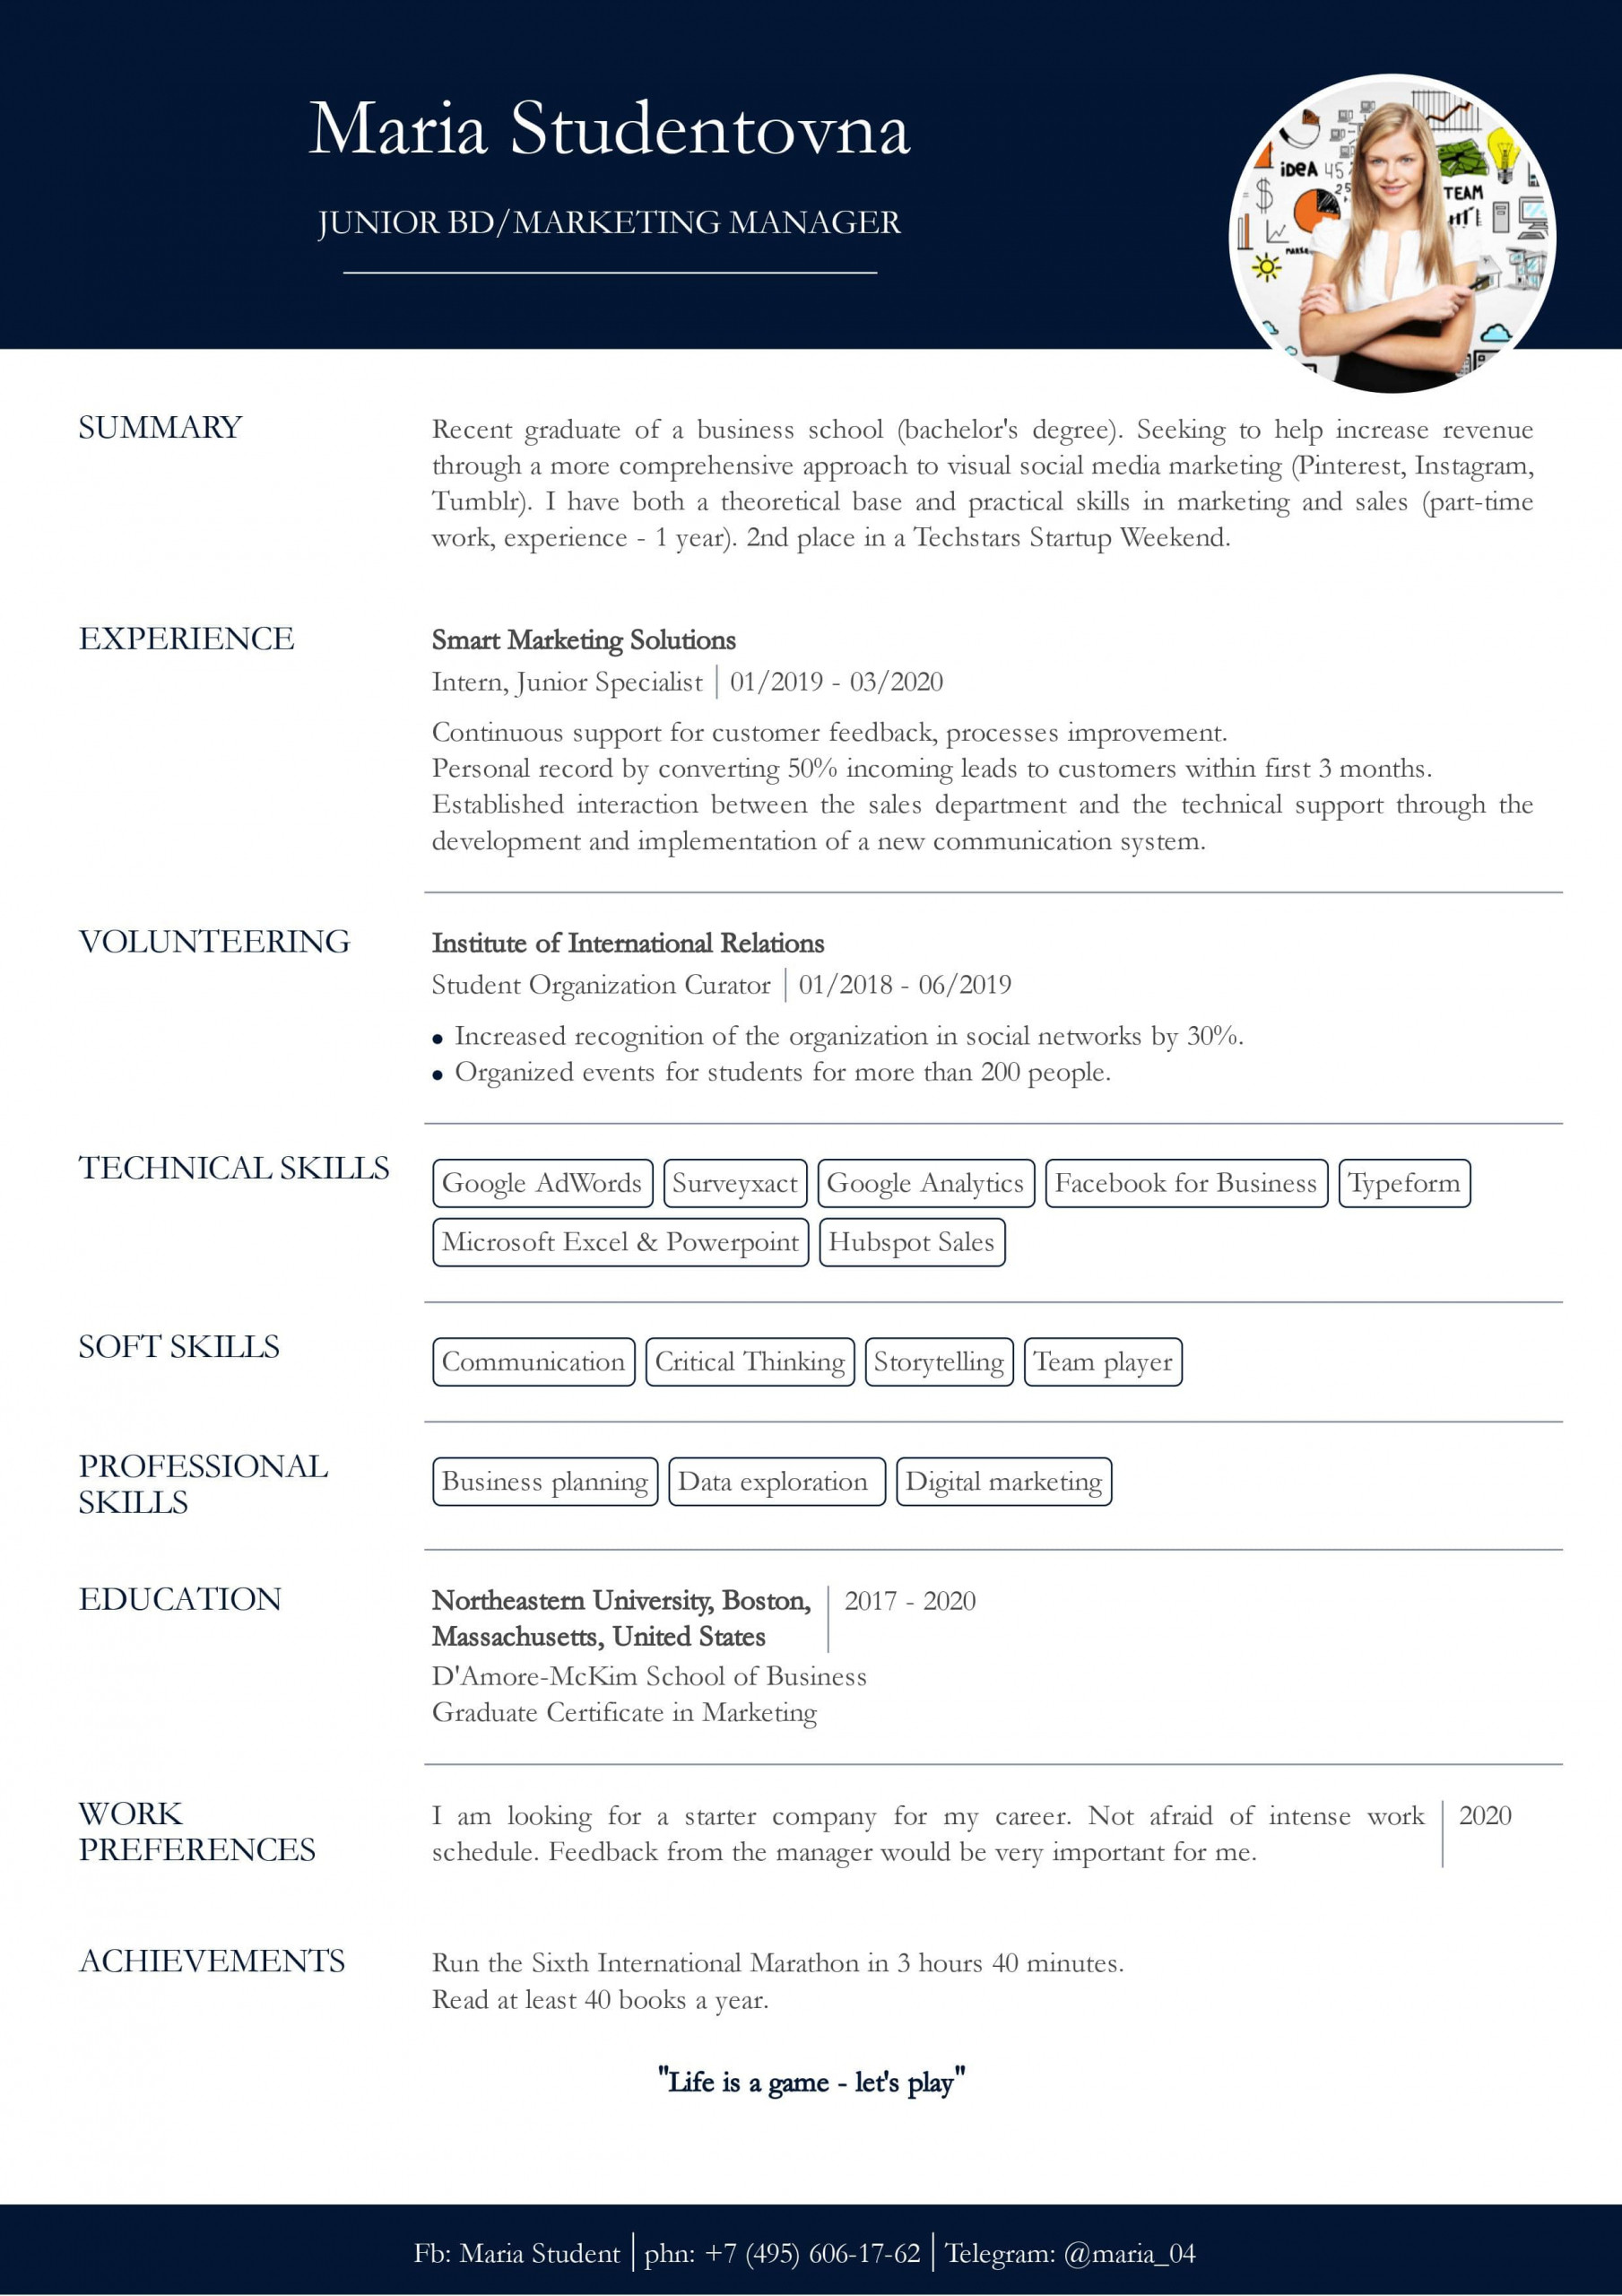 Resume for First Job No Experience Sample Resume with No Work Experience. Sample for Students. – Cv2you Blog